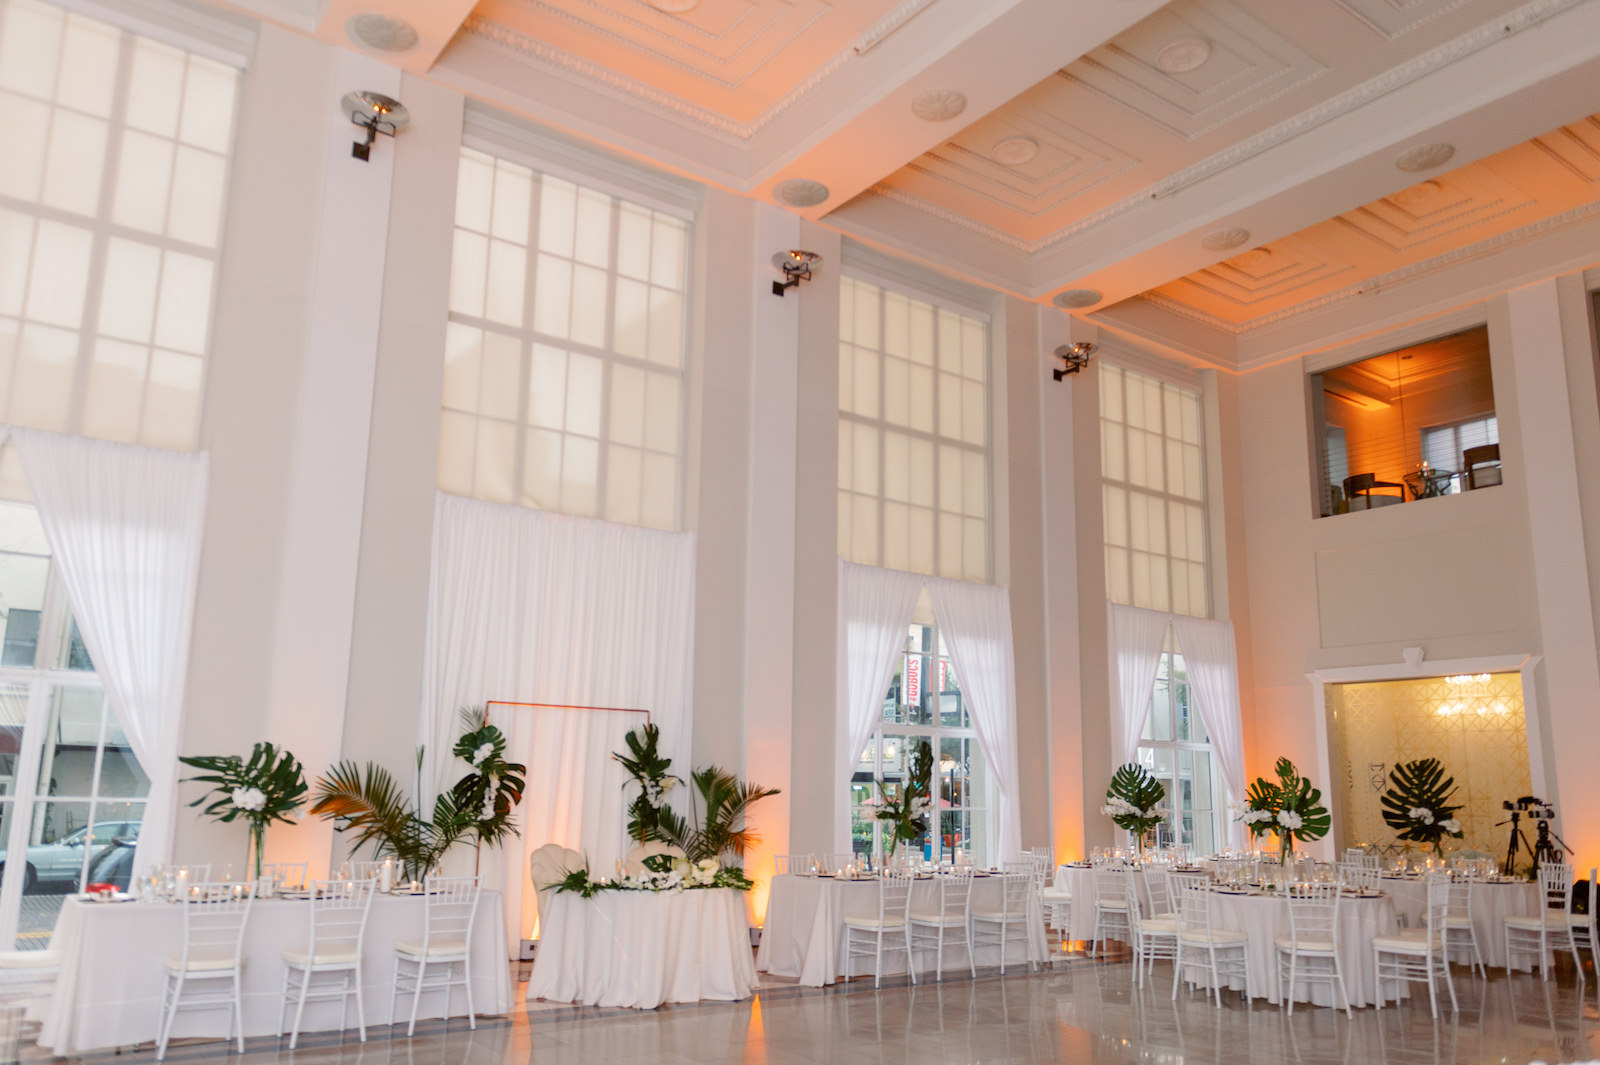 White and Green Modern Minimalist Tropical Wedding Reception Decor, White Chiavari Chairs, Monstera and Palm Fronds with White Flowers Centerpieces | Tampa Bay Wedding Planner Taylored Affairs | Downtown Tampa Wedding Venue The Vault